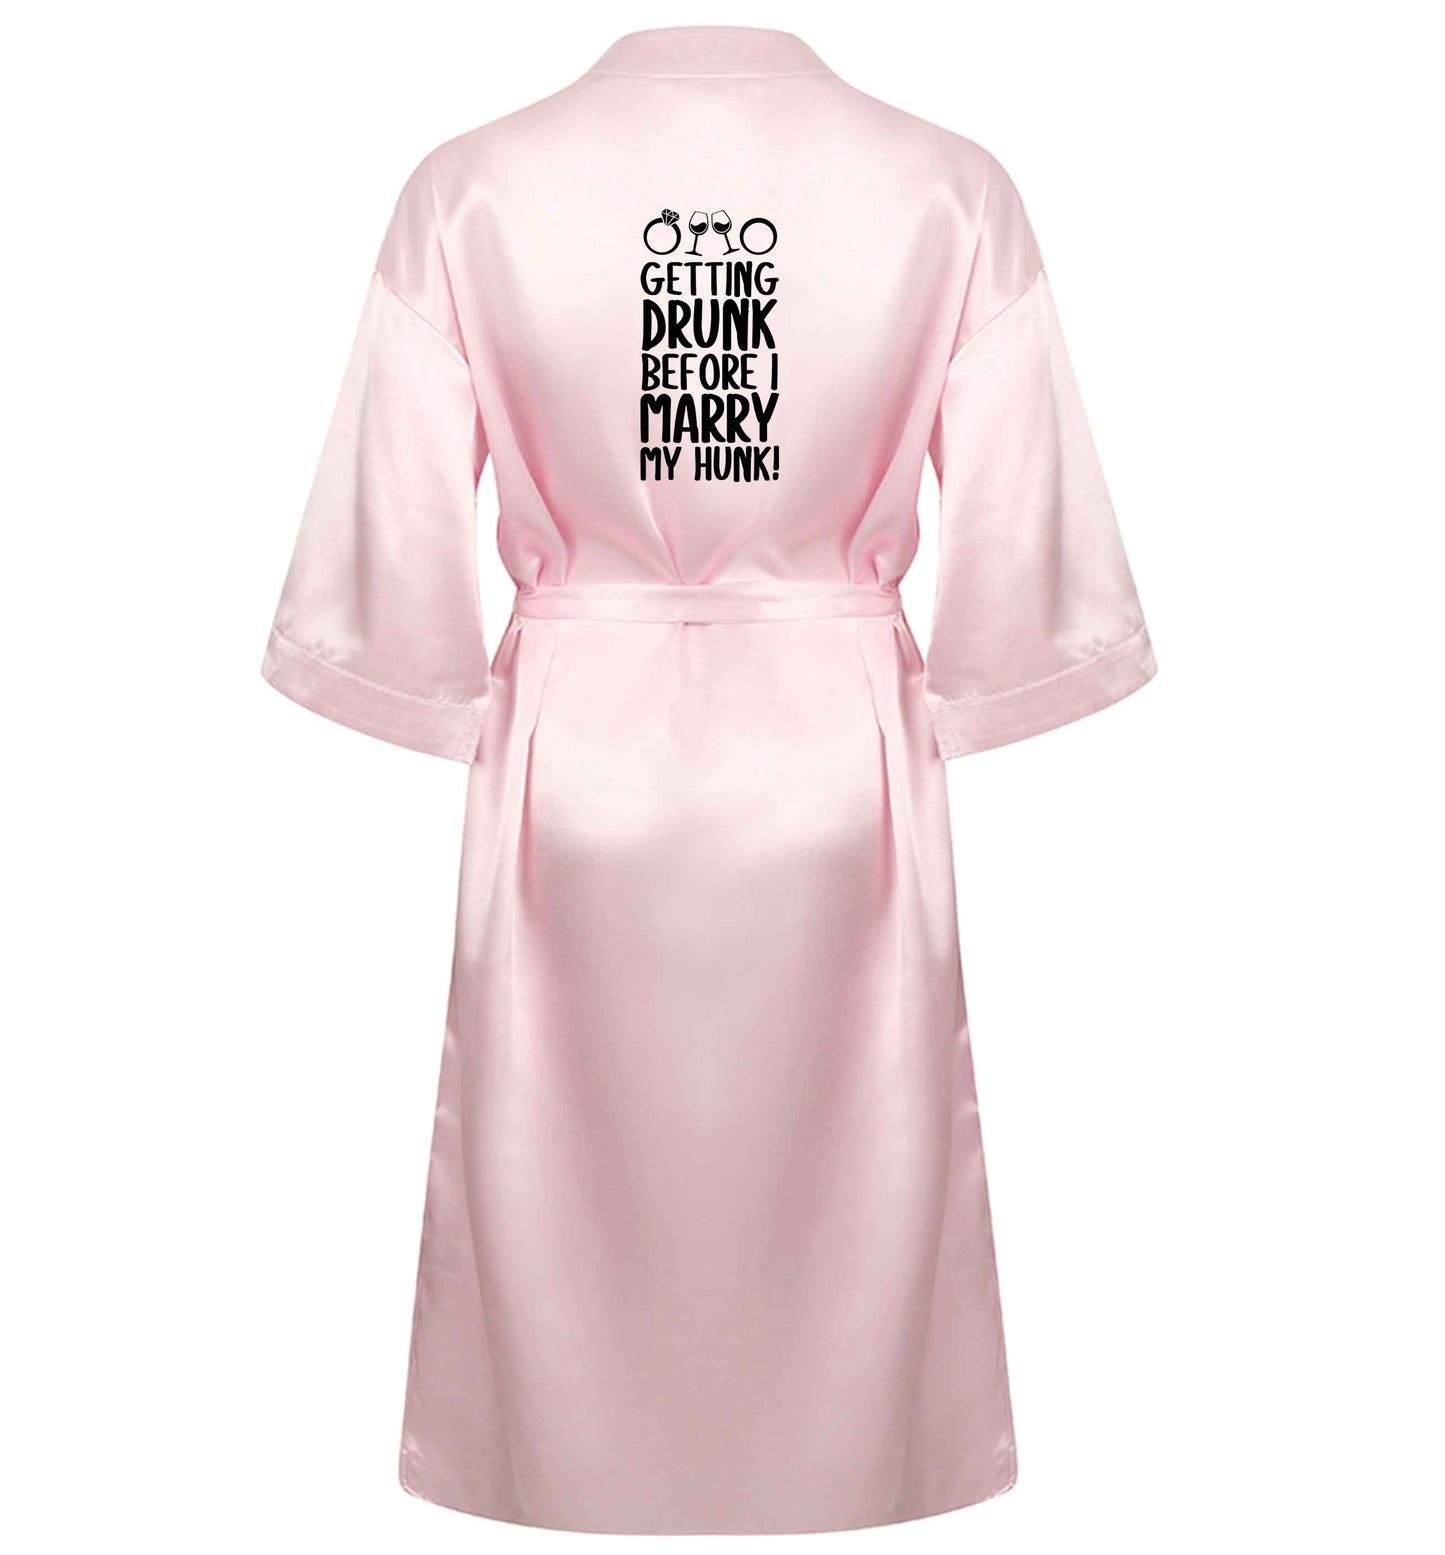 Getting drunk before I marry my hunk XL/XXL pink  ladies dressing gown size 16/18